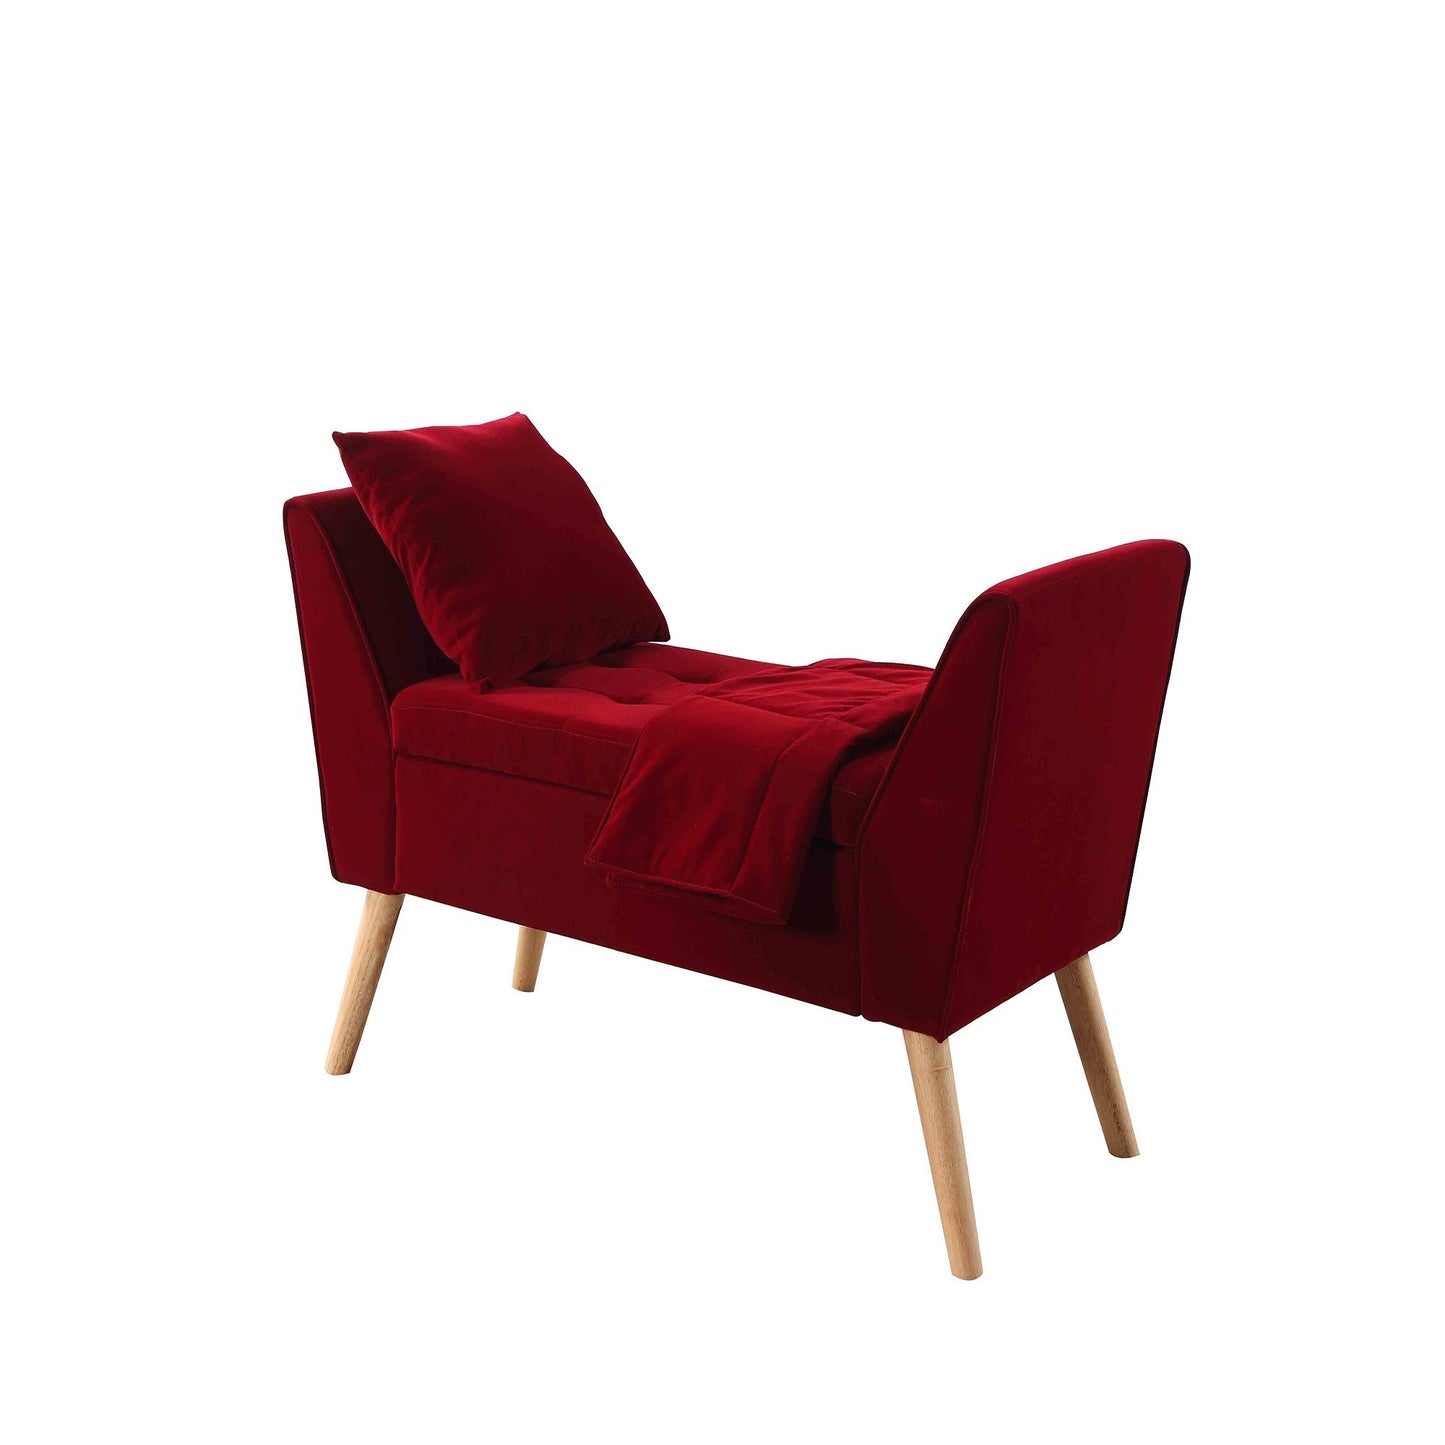 Deep Red Modern Flair Storage Bench with Pillow and Blanket By Homeroots